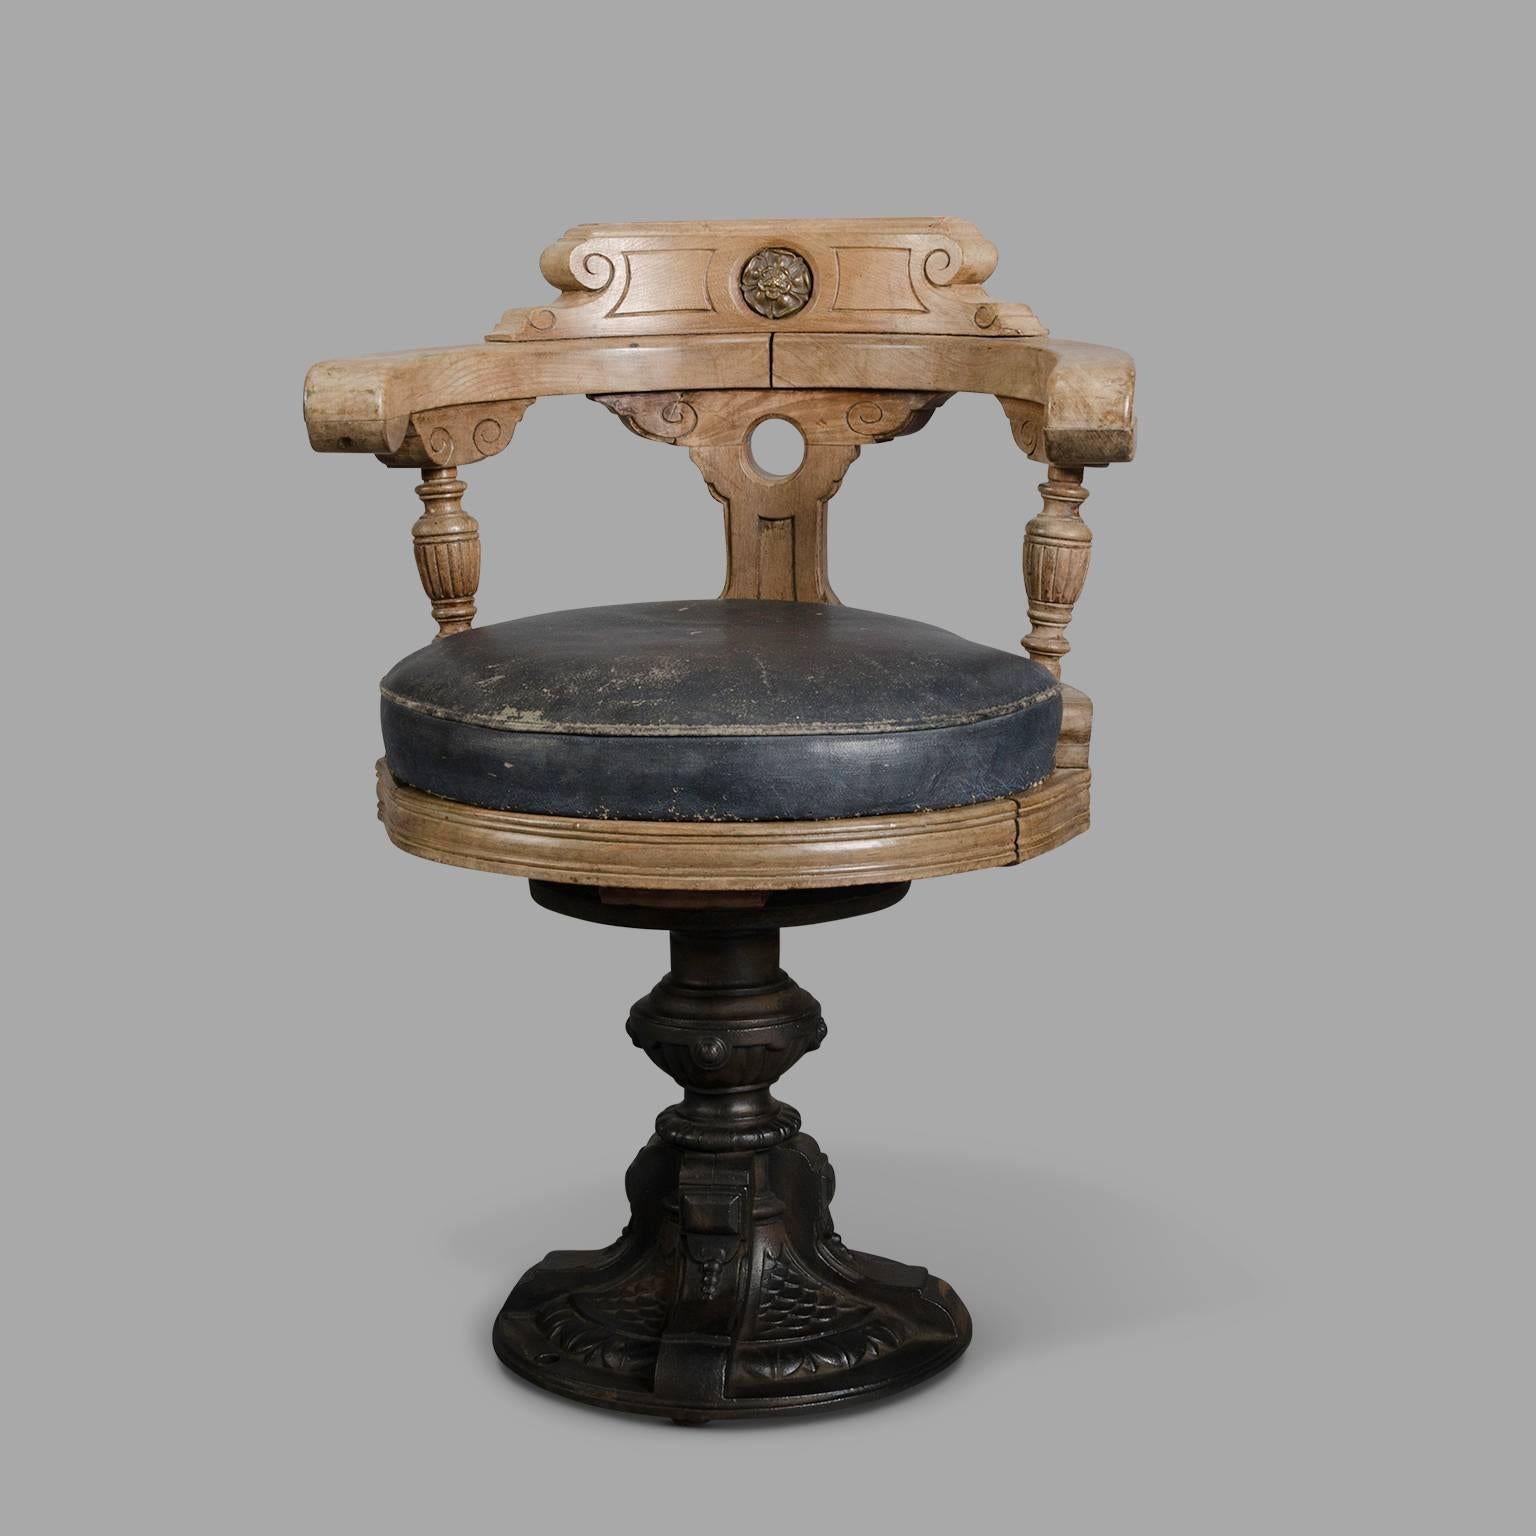 Blond mahogany with cast iron pedestal and coated canvas seat. To facilitate the use of this chair once fixed to the ground, the seat rotates on an off-axis pivot to ease leaving from desk or table.
The cast iron base is signed 